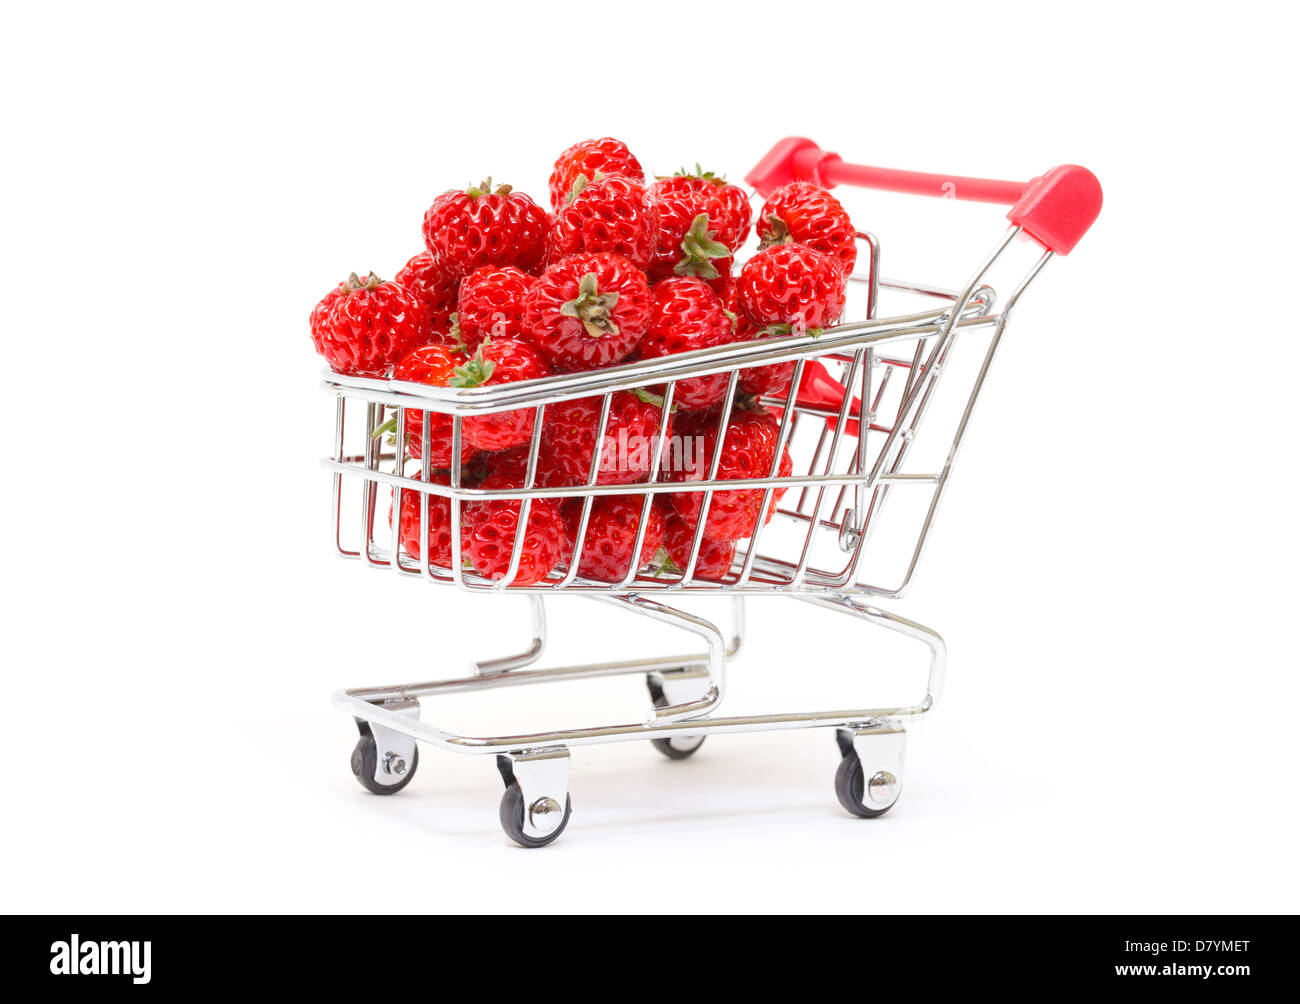 Ripe Red strawberries in shopping cart, on white background Stock Photo